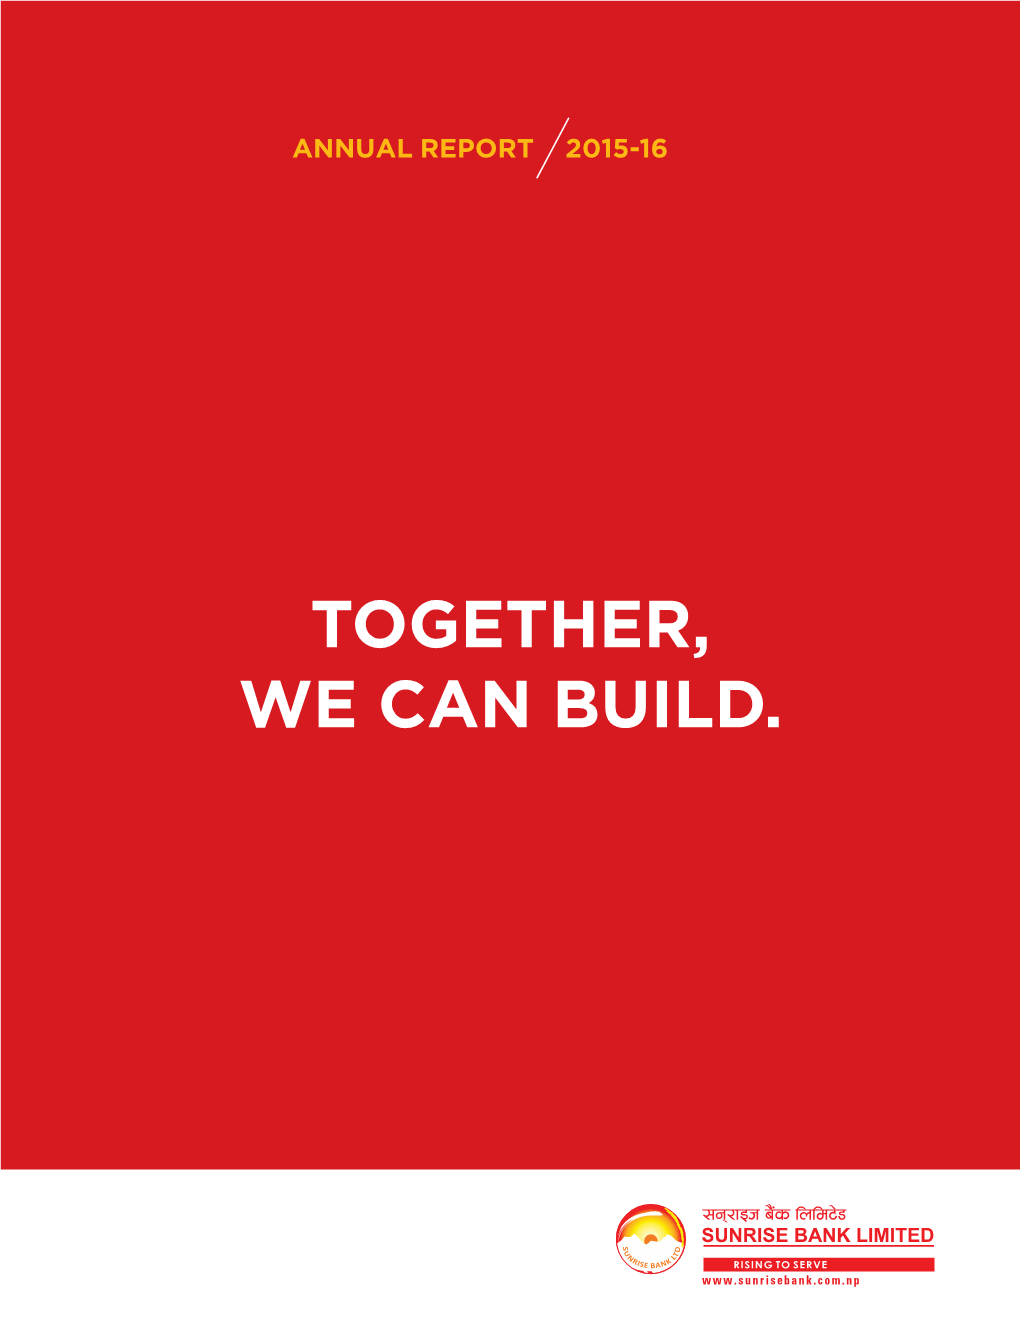 TOGETHER, WE CAN BUILD. We Make Commitments, Take Responsibilities, Promote Trust and Build Partnership; Summing up We Can Say, “YOU & US TOGETHER, WE CAN BUILD”